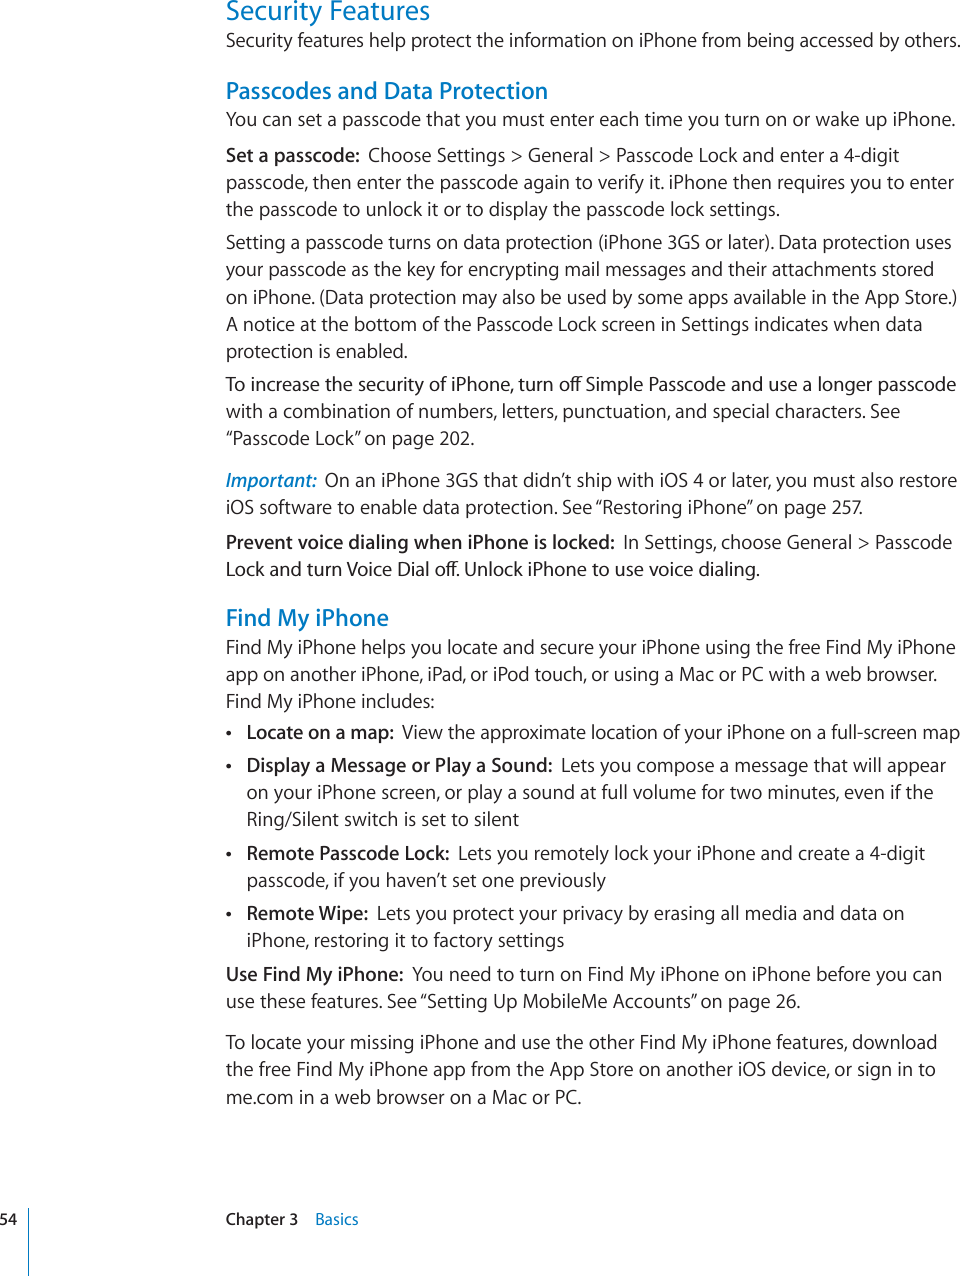 Security FeaturesSecurity features help protect the information on iPhone from being accessed by others.Passcodes and Data ProtectionYou can set a passcode that you must enter each time you turn on or wake up iPhone.Set a passcode: Choose Settings &gt; General &gt; Passcode Lock and enter a 4-digit passcode, then enter the passcode again to verify it. iPhone then requires you to enter the passcode to unlock it or to display the passcode lock settings.Setting a passcode turns on data protection (iPhone 3GS or later). Data protection uses your passcode as the key for encrypting mail messages and their attachments stored on iPhone. (Data protection may also be used by some apps available in the App Store.) A notice at the bottom of the Passcode Lock screen in Settings indicates when data protection is enabled.6QKPETGCUGVJGUGEWTKV[QHK2JQPGVWTPQÒ5KORNG2CUUEQFGCPFWUGCNQPIGTRCUUEQFGwith a combination of numbers, letters, punctuation, and special characters. See “Passcode Lock” on page 202.Important: On an iPhone 3GS that didn’t ship with iOS 4 or later, you must also restore iOS software to enable data protection. See “Restoring iPhone” on page 257.Prevent voice dialing when iPhone is locked: In Settings, choose General &gt; Passcode .QEMCPFVWTP8QKEG&amp;KCNQÒ7PNQEMK2JQPGVQWUGXQKEGFKCNKPIFind My iPhoneFind My iPhone helps you locate and secure your iPhone using the free Find My iPhone app on another iPhone, iPad, or iPod touch, or using a Mac or PC with a web browser. Find My iPhone includes:Locate on a map: View the approximate location of your iPhone on a full-screen mapDisplay a Message or Play a Sound: Lets you compose a message that will appear on your iPhone screen, or play a sound at full volume for two minutes, even if the Ring/Silent switch is set to silentRemote Passcode Lock: Lets you remotely lock your iPhone and create a 4-digit passcode, if you haven’t set one previouslyRemote Wipe: Lets you protect your privacy by erasing all media and data on iPhone, restoring it to factory settingsUse Find My iPhone: You need to turn on Find My iPhone on iPhone before you can use these features. See “Setting Up MobileMe Accounts” on page 26.To locate your missing iPhone and use the other Find My iPhone features, download the free Find My iPhone app from the App Store on another iOS device, or sign in to me.com in a web browser on a Mac or PC.54 Chapter 3 Basics